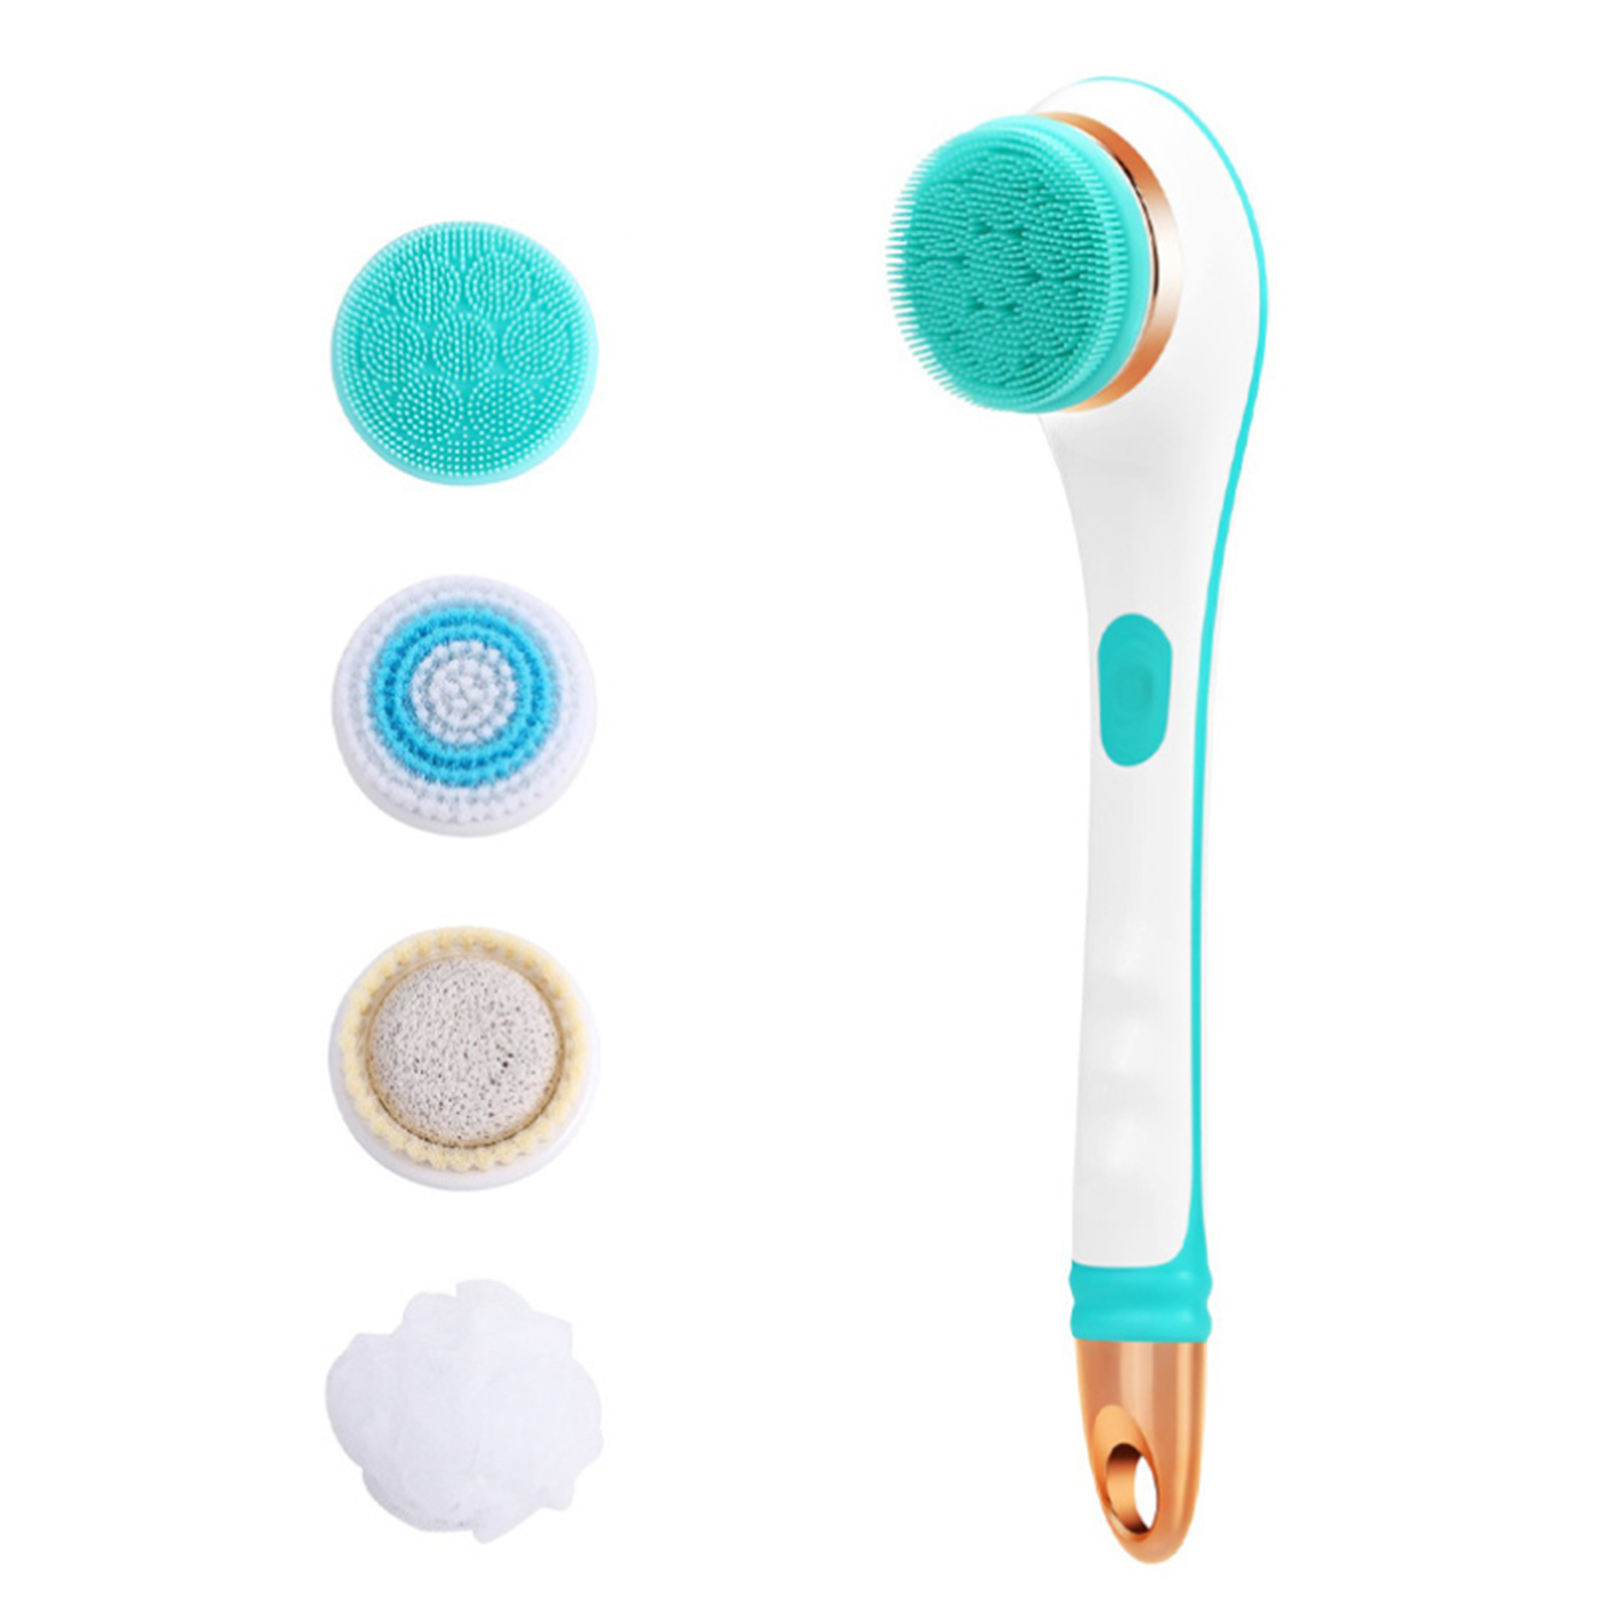 MIXFEER Electric Silicone Bath Brush Back Scrubber 4 Brush Heads USB Rechargeable Rotating Shower Massager with 2 Speeds Long Handle Body Cleansing Brush - image 2 of 7